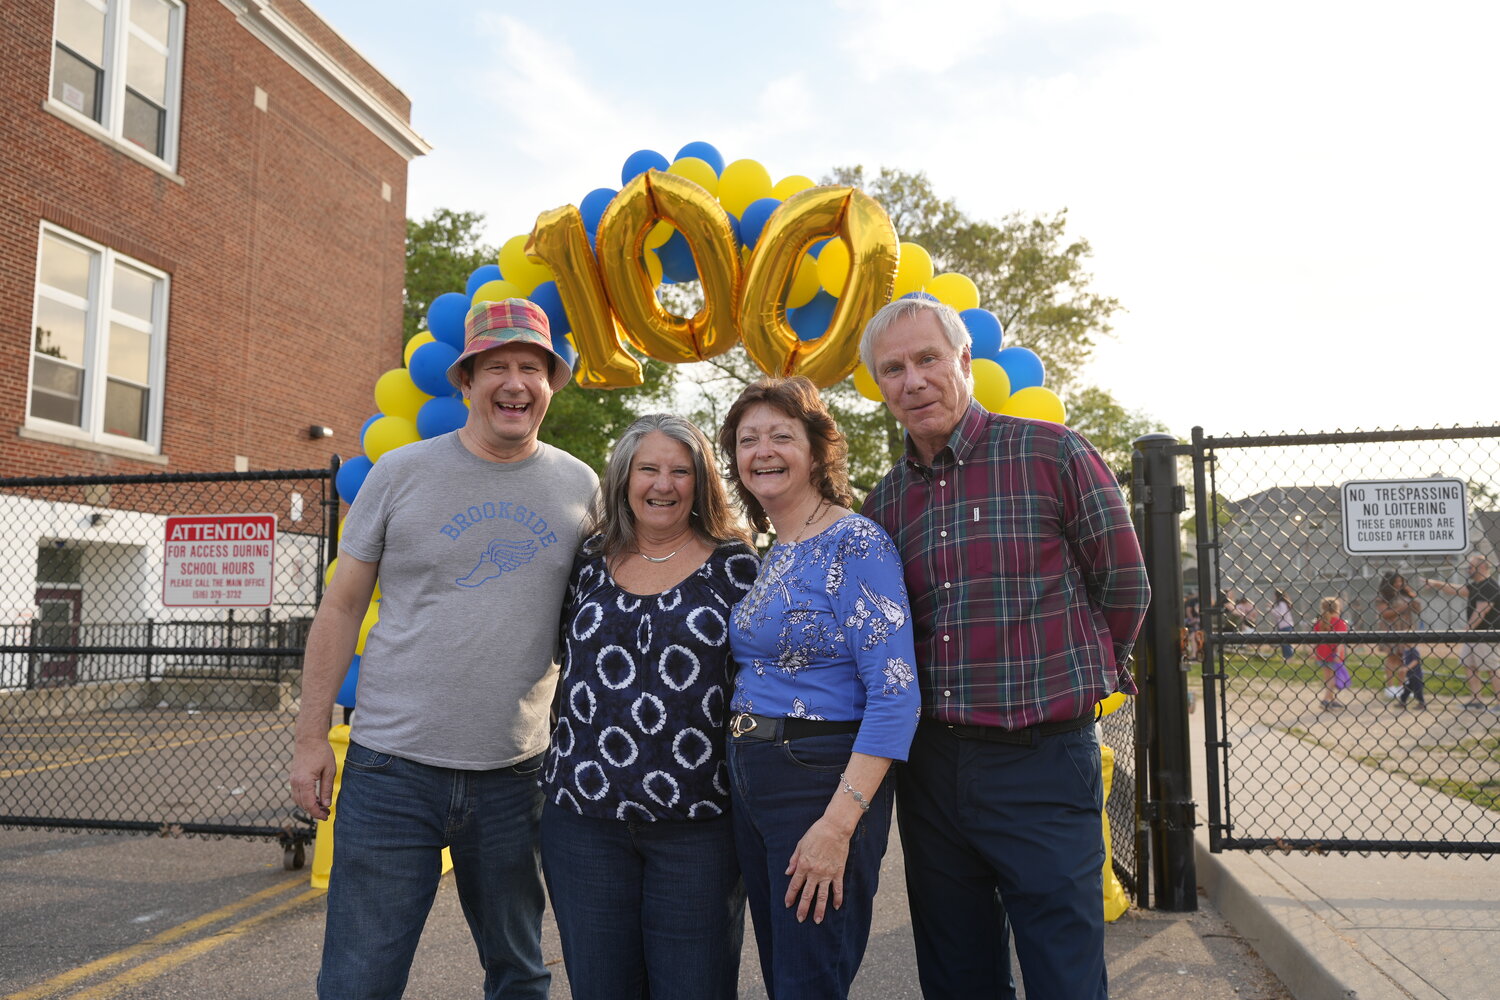 The centennial celebration even attracted alumni of Camp Avenue. From left, Rand Hoppe, class of ’72, Ellen Hoppe, class of ’67, Nancy McLaughlin, class of ’67, Bob Lehmann, class of ’65.